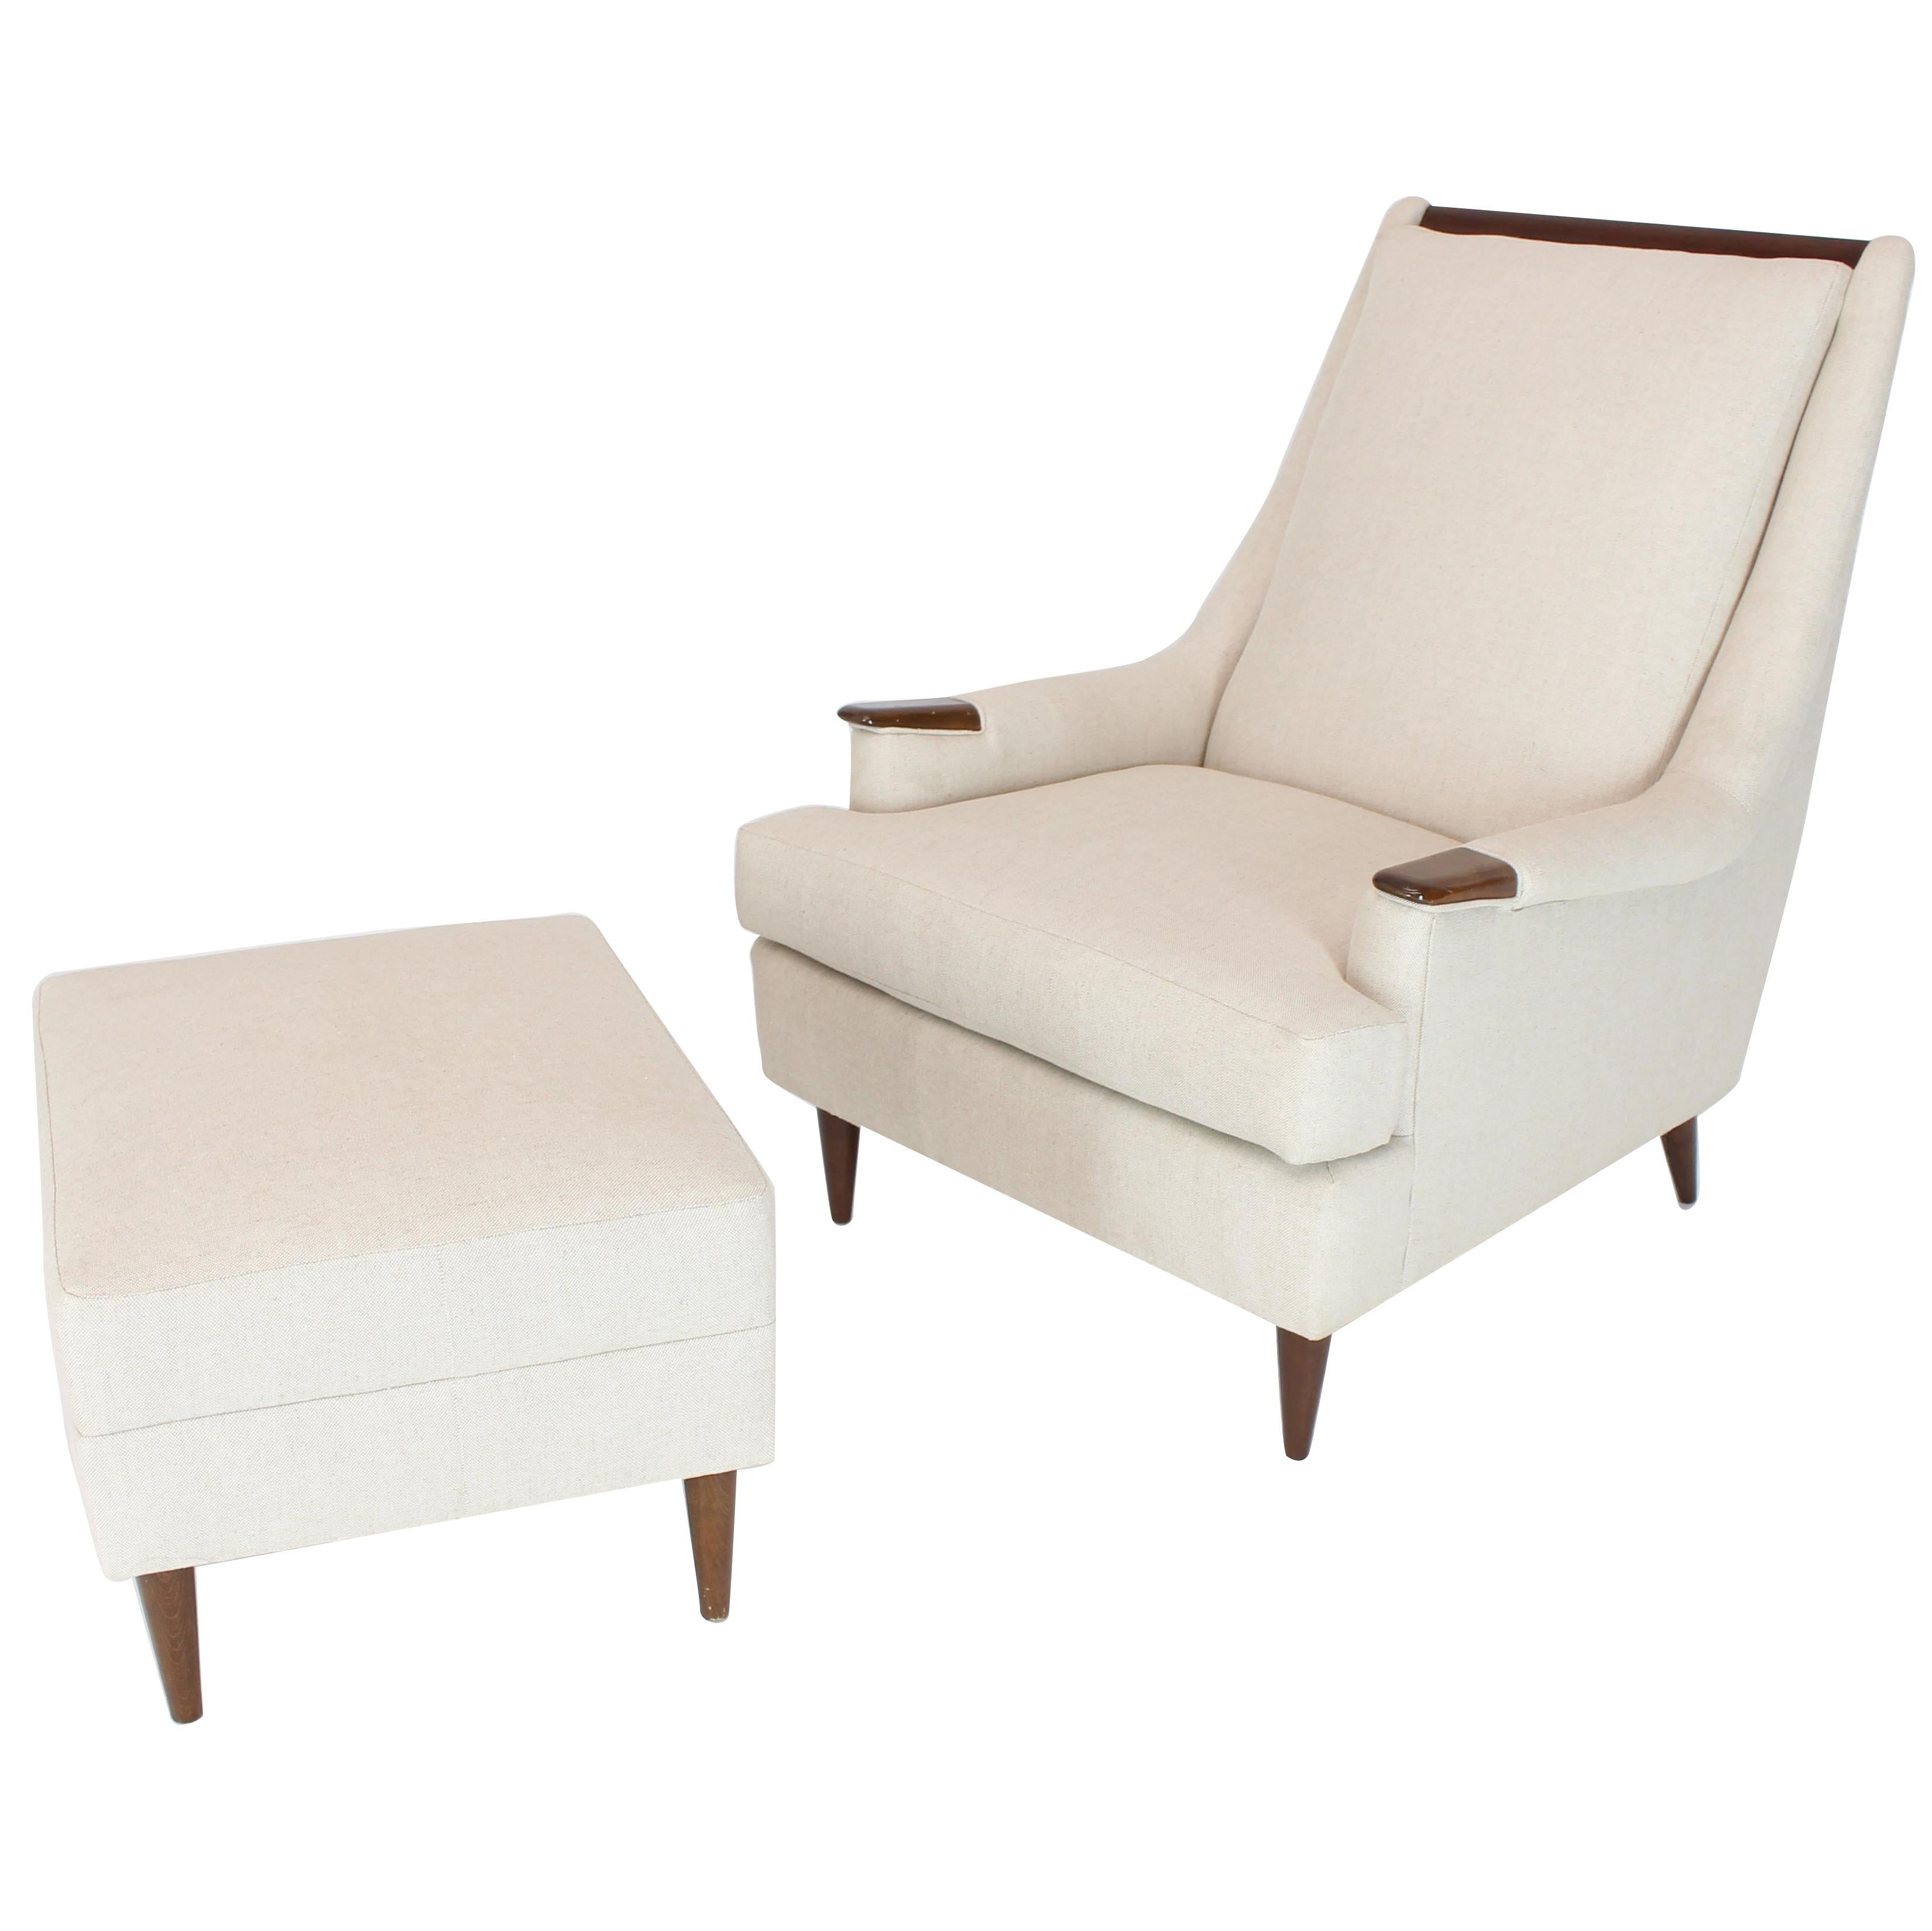 New Linen Upholstery Mid-Century Modern Lounge Chair with Matching Ottoman